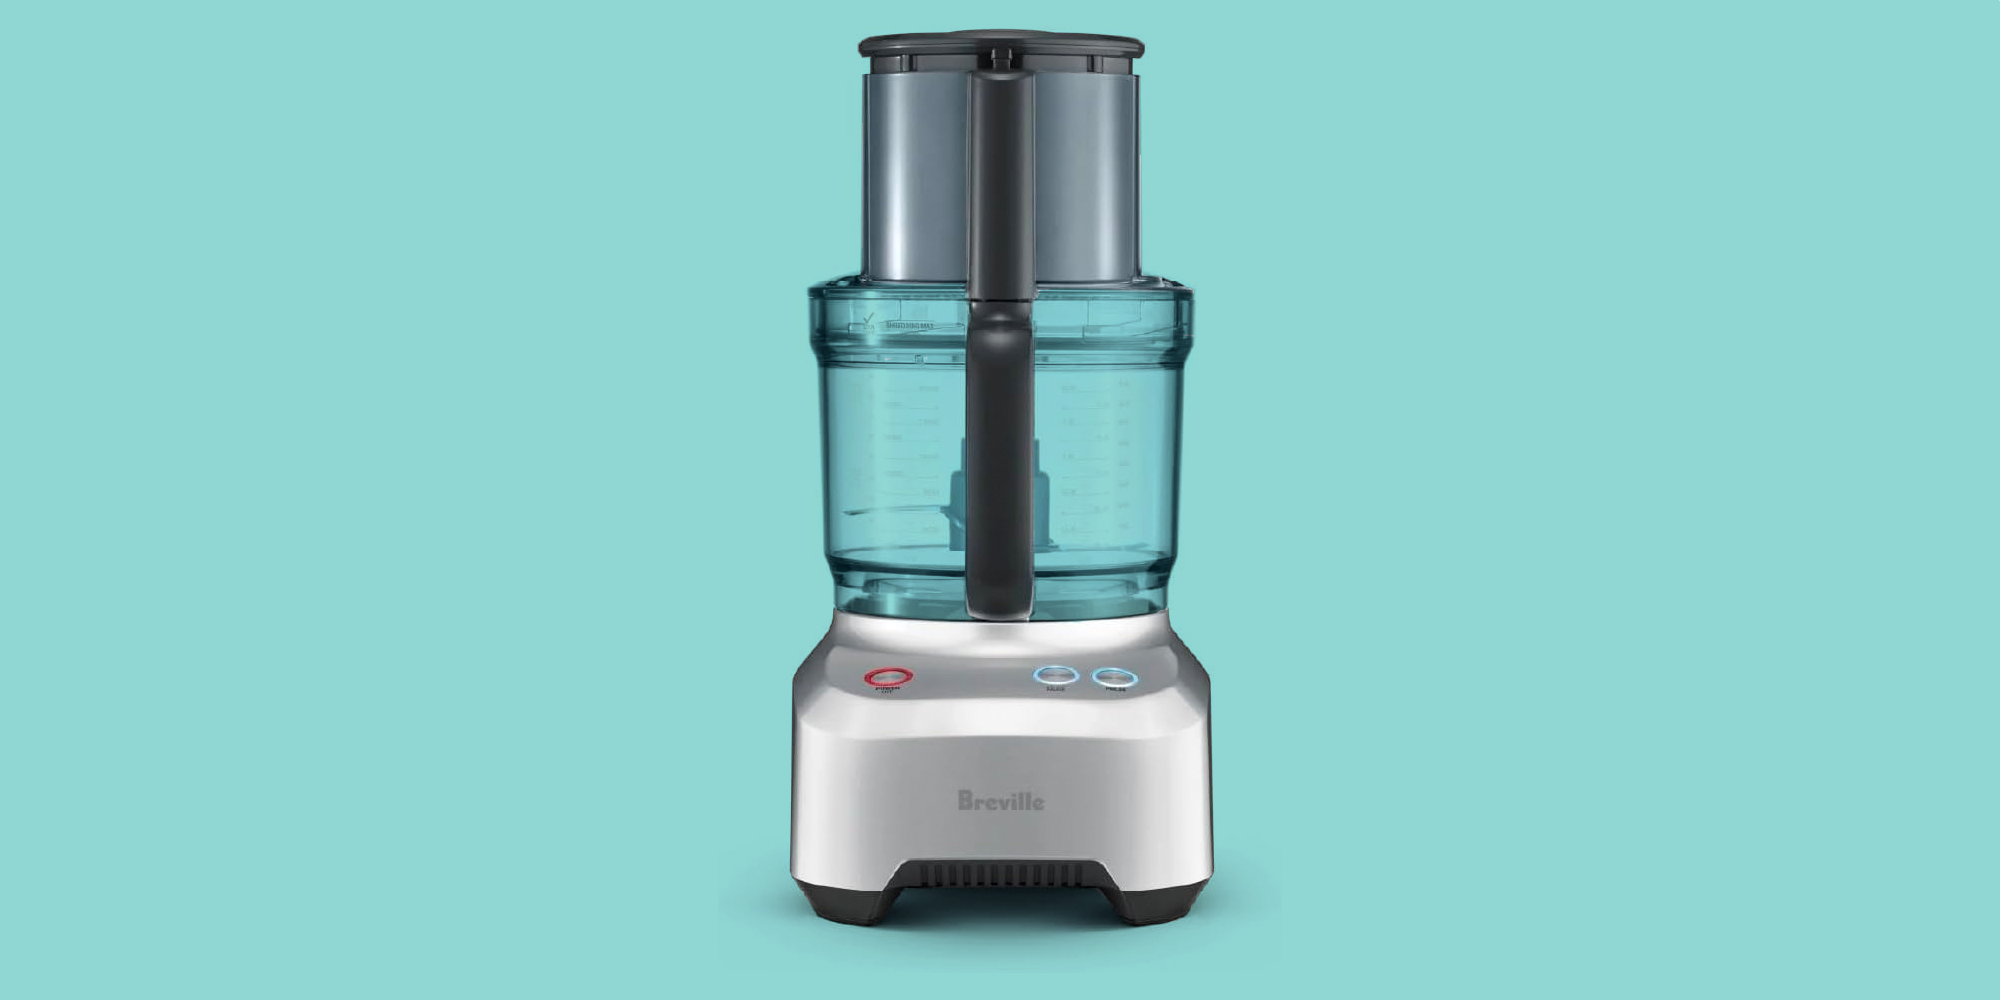 Food Processor vs. Blender: What's the Difference? - PureWow